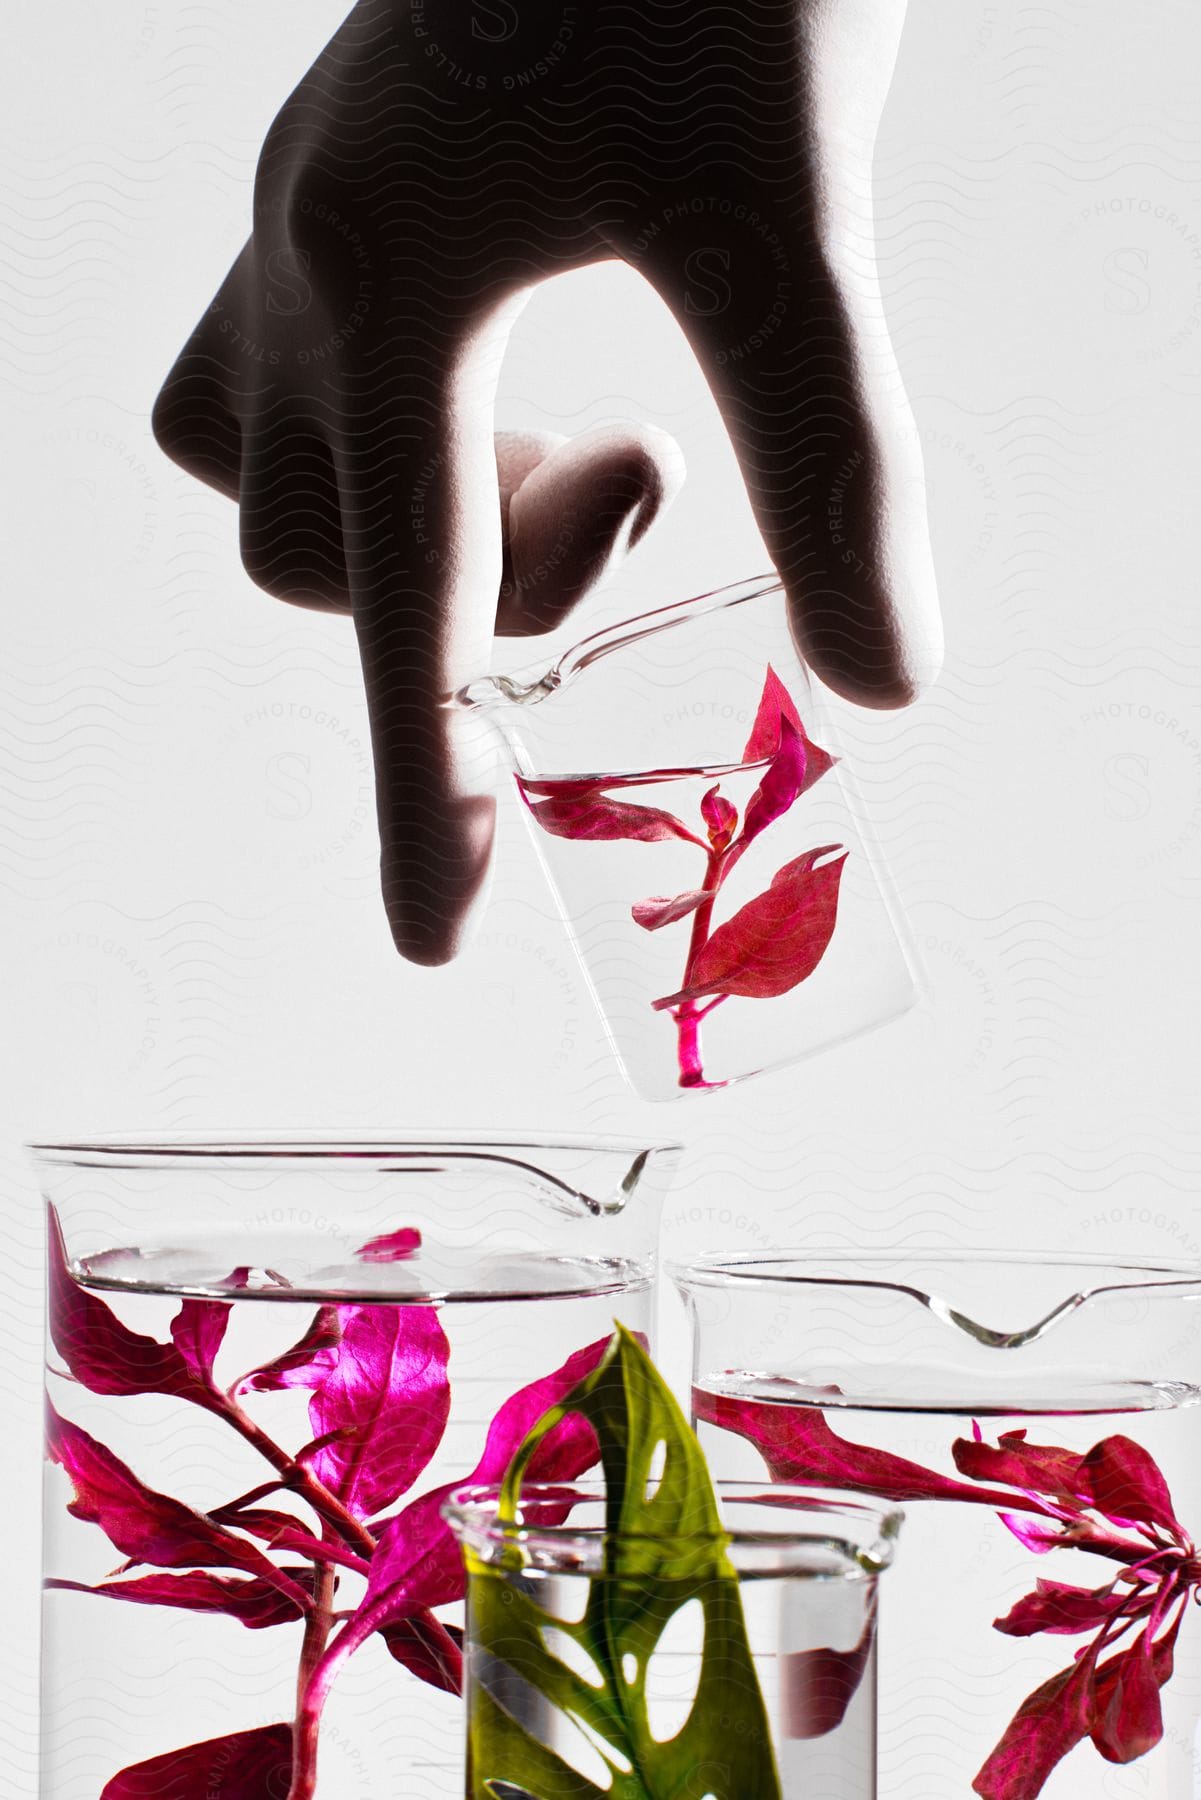 Hand holding a bottle with water and plant inside with other vases of different sizes with plants on a white background.